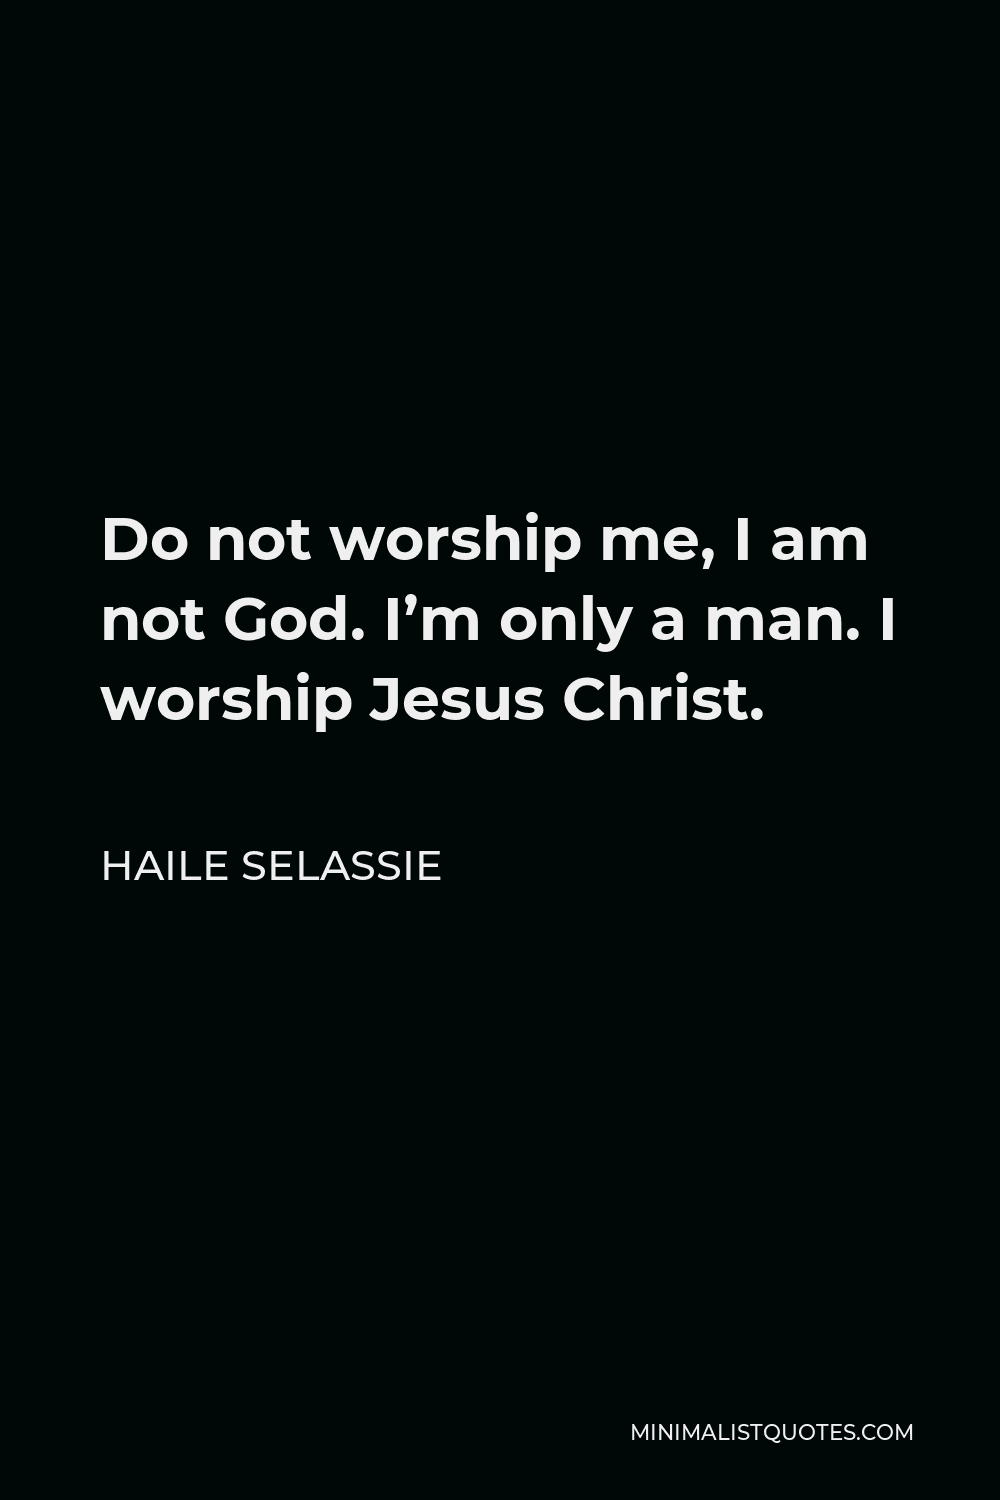 Haile Selassie Quote - Do not worship me, I am not God. I’m only a man. I worship Jesus Christ.